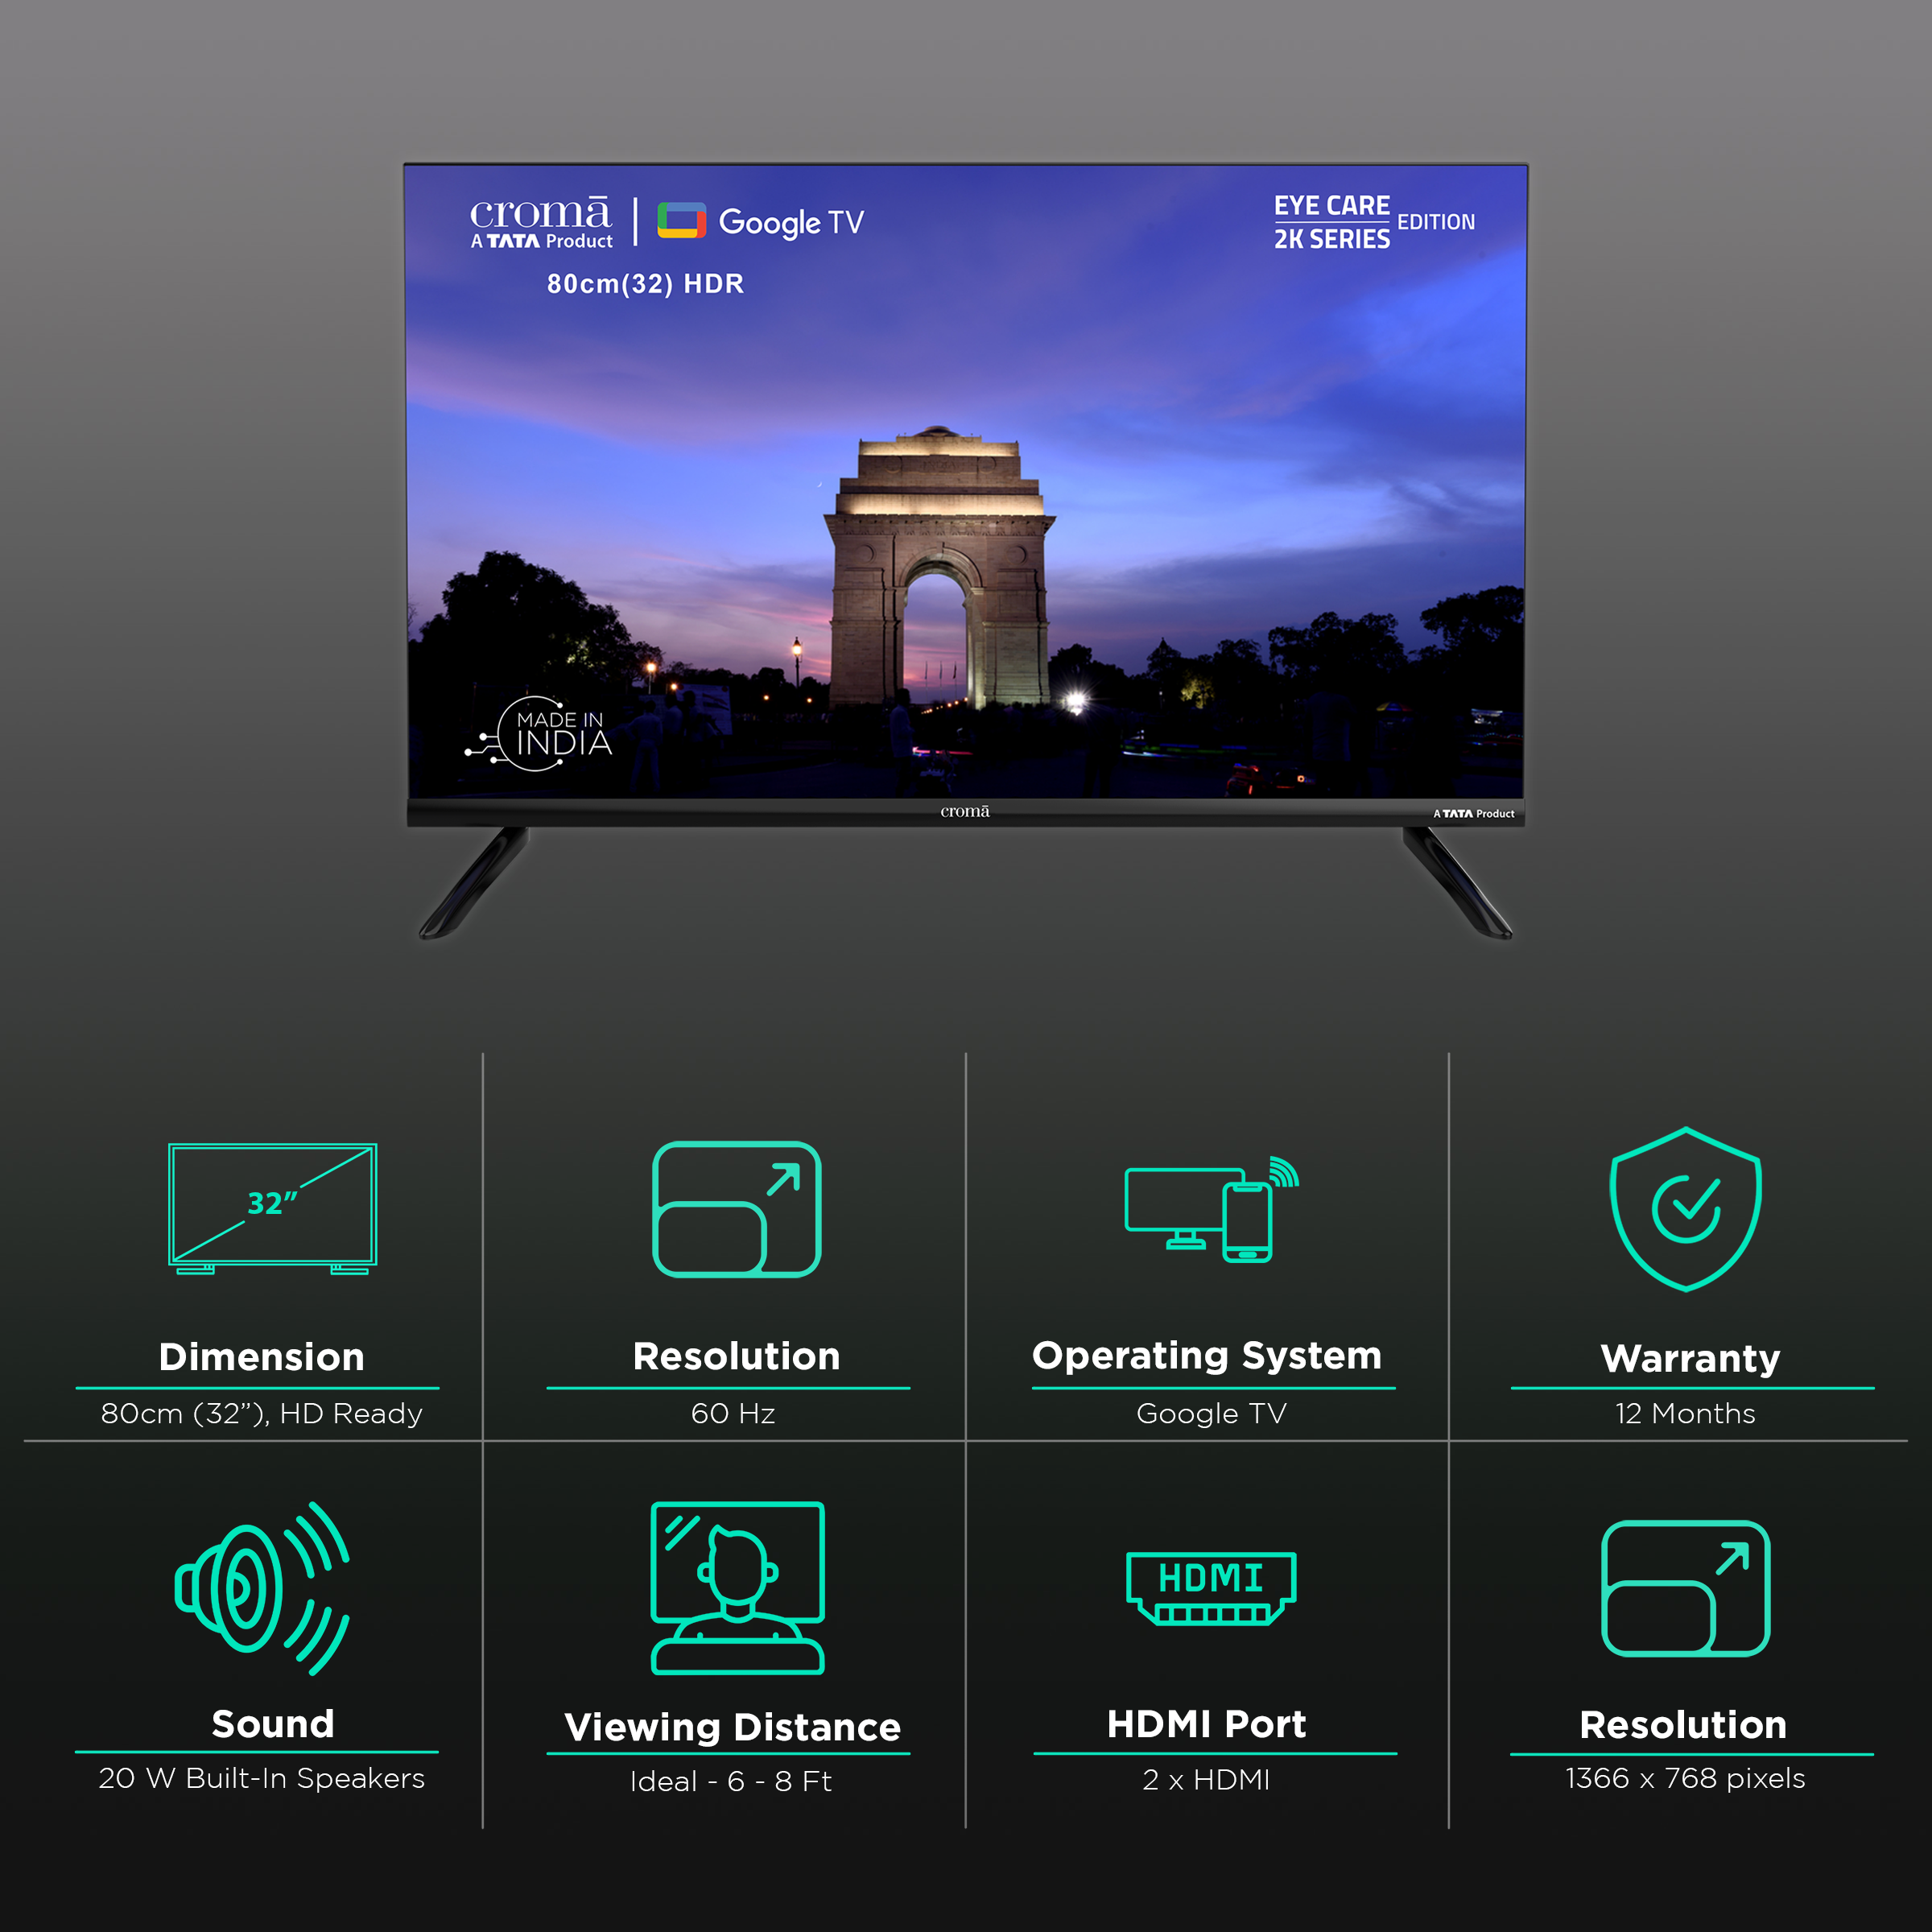 Buy LG LQ64 80 cm (32 inch) HD Ready LED Smart WebOS TV with Active HDR  Online - Croma